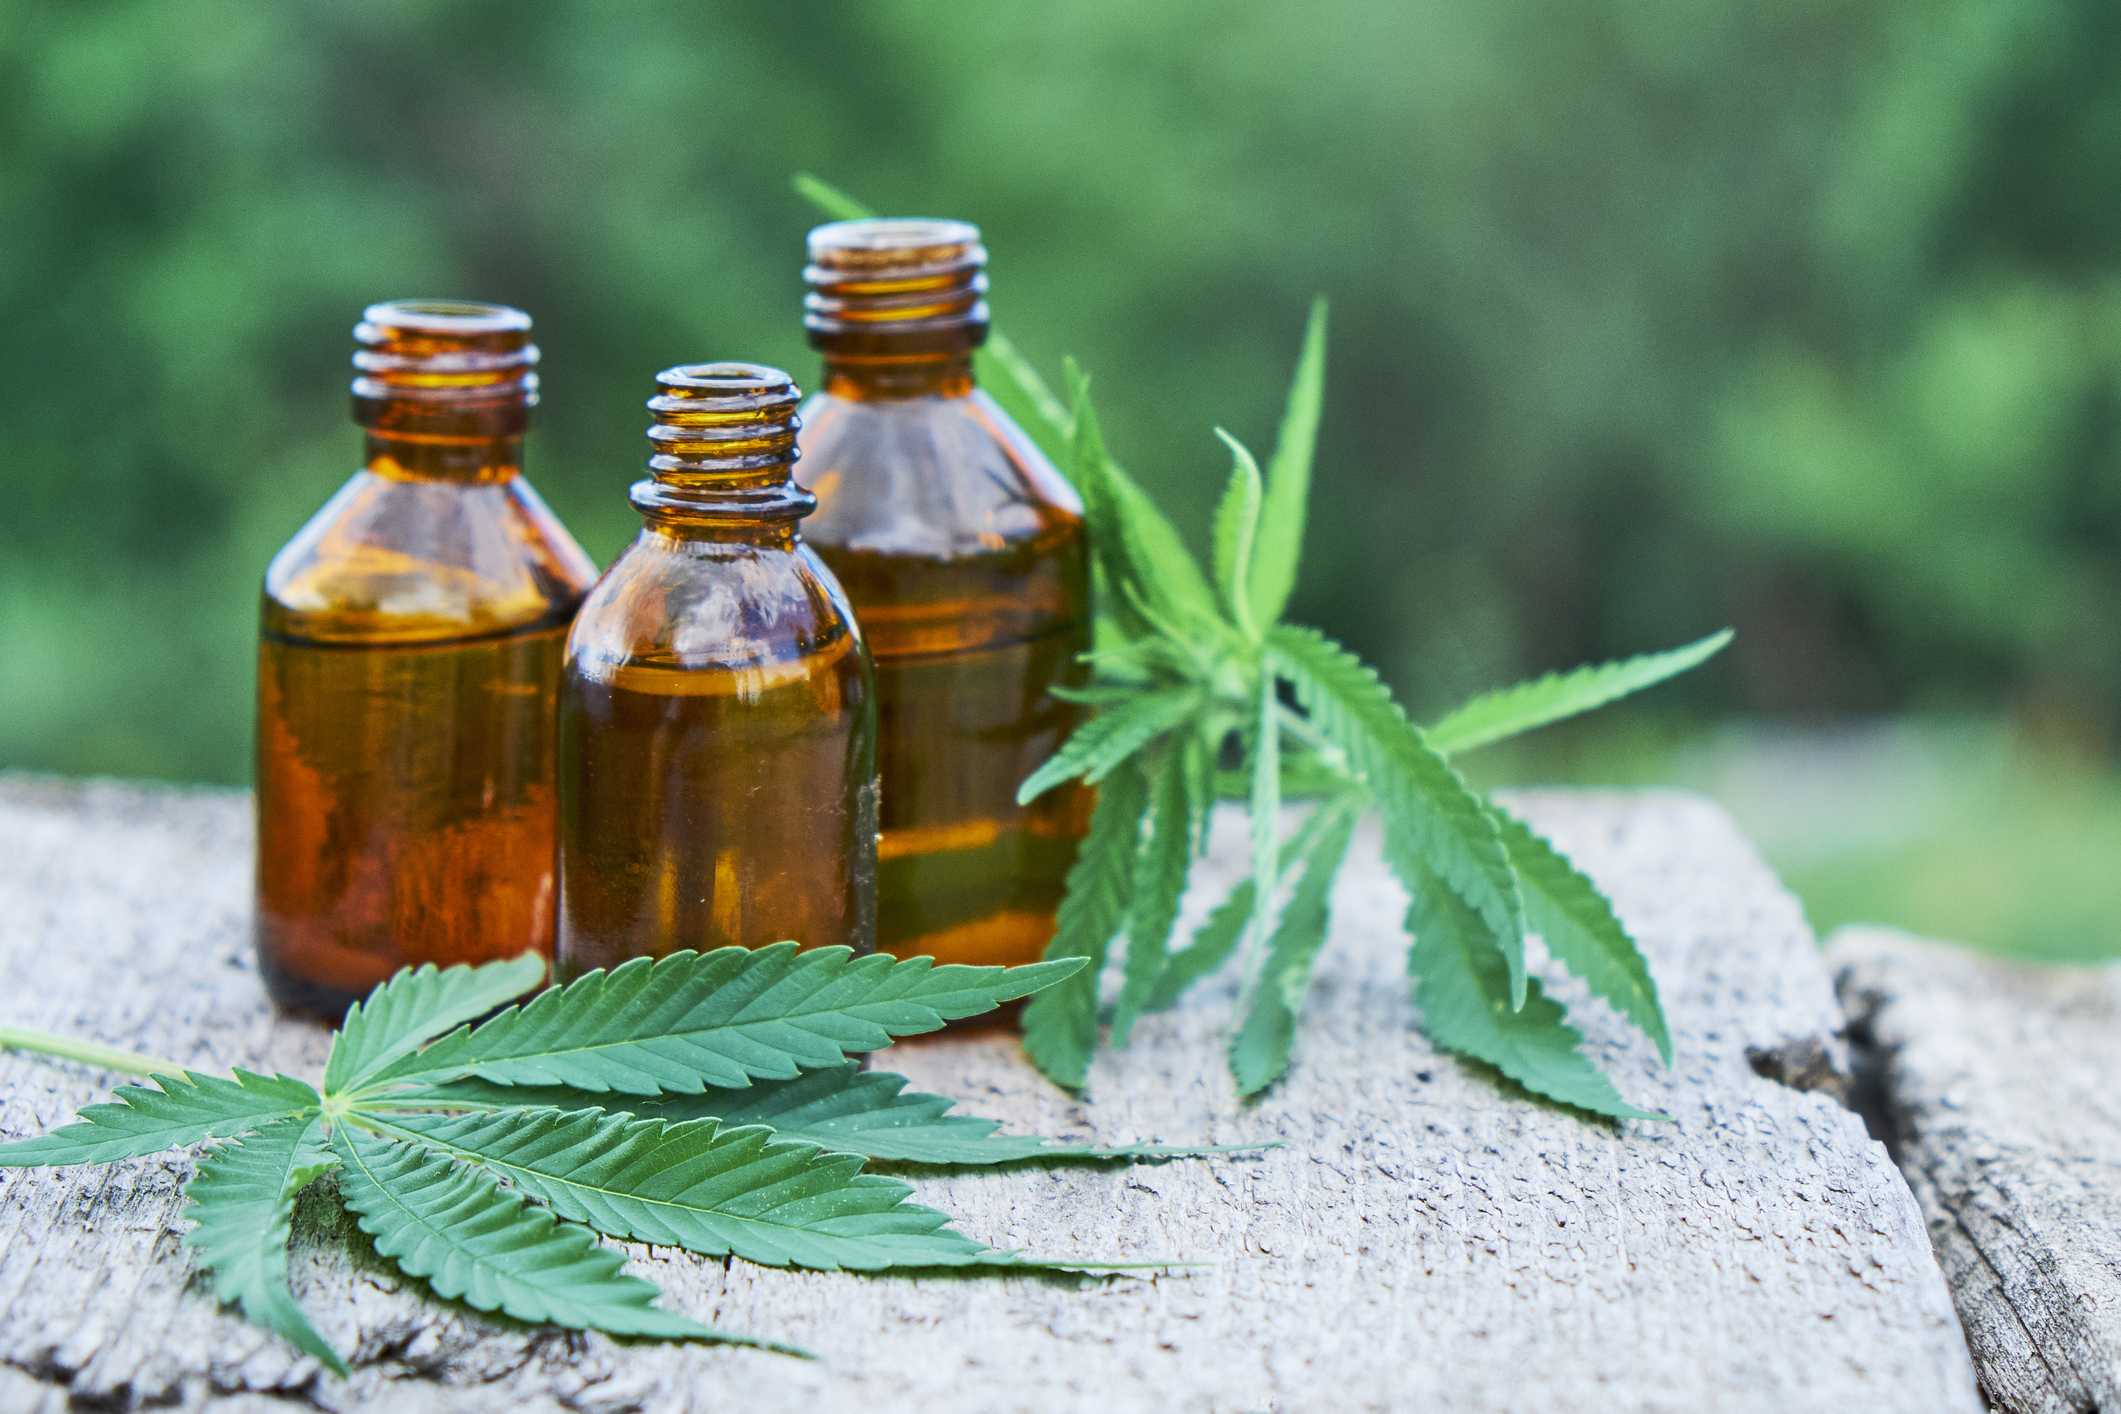 Cbd Oil How Long See Improve Fibromyalgia - Cbd|Oil|Cannabidiol|Products|View|Abstract|Effects|Hemp|Cannabis|Product|Thc|Pain|People|Health|Body|Plant|Cannabinoids|Medications|Oils|Drug|Benefits|System|Study|Marijuana|Anxiety|Side|Research|Effect|Liver|Quality|Treatment|Studies|Epilepsy|Symptoms|Gummies|Compounds|Dose|Time|Inflammation|Bottle|Cbd Oil|View Abstract|Side Effects|Cbd Products|Endocannabinoid System|Multiple Sclerosis|Cbd Oils|Cbd Gummies|Cannabis Plant|Hemp Oil|Cbd Product|Hemp Plant|United States|Cytochrome P450|Many People|Chronic Pain|Nuleaf Naturals|Royal Cbd|Full-Spectrum Cbd Oil|Drug Administration|Cbd Oil Products|Medical Marijuana|Drug Test|Heavy Metals|Clinical Trial|Clinical Trials|Cbd Oil Side|Rating Highlights|Wide Variety|Animal Studies